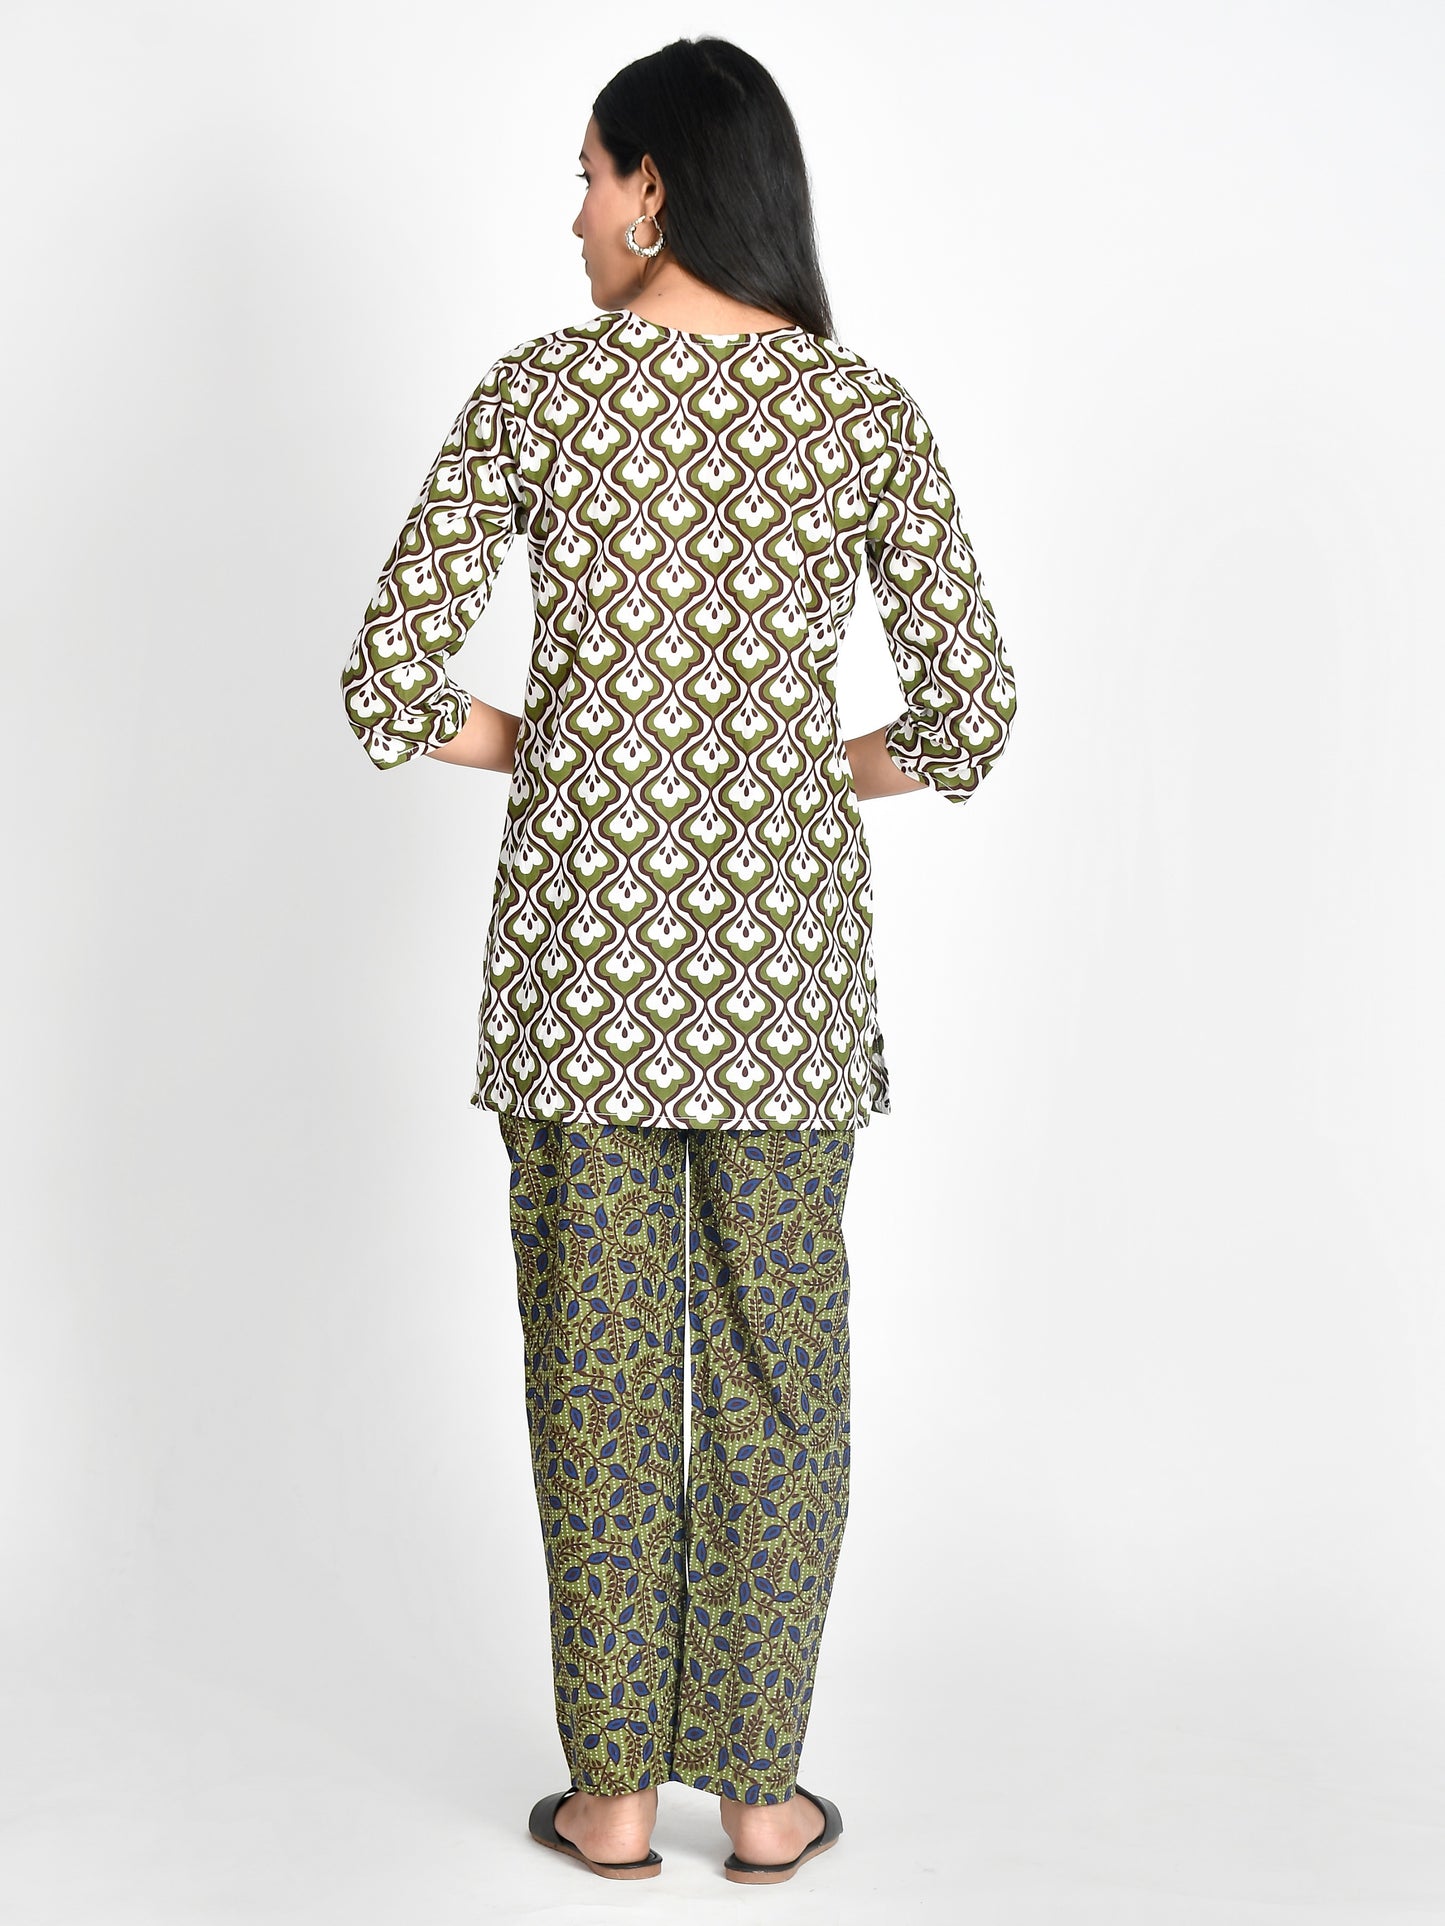 Stay cool and comfortable all night long in our Pure Cotton printed Night suit for girls/Women. Made with 100% cotton, this night suit is soft and breathable, ensuring a restful sleep. The vibrant prints add a touch of style while the cotton fabric provides ultimate comfort. Sleep soundly in our Pure Cotton printed Night sui